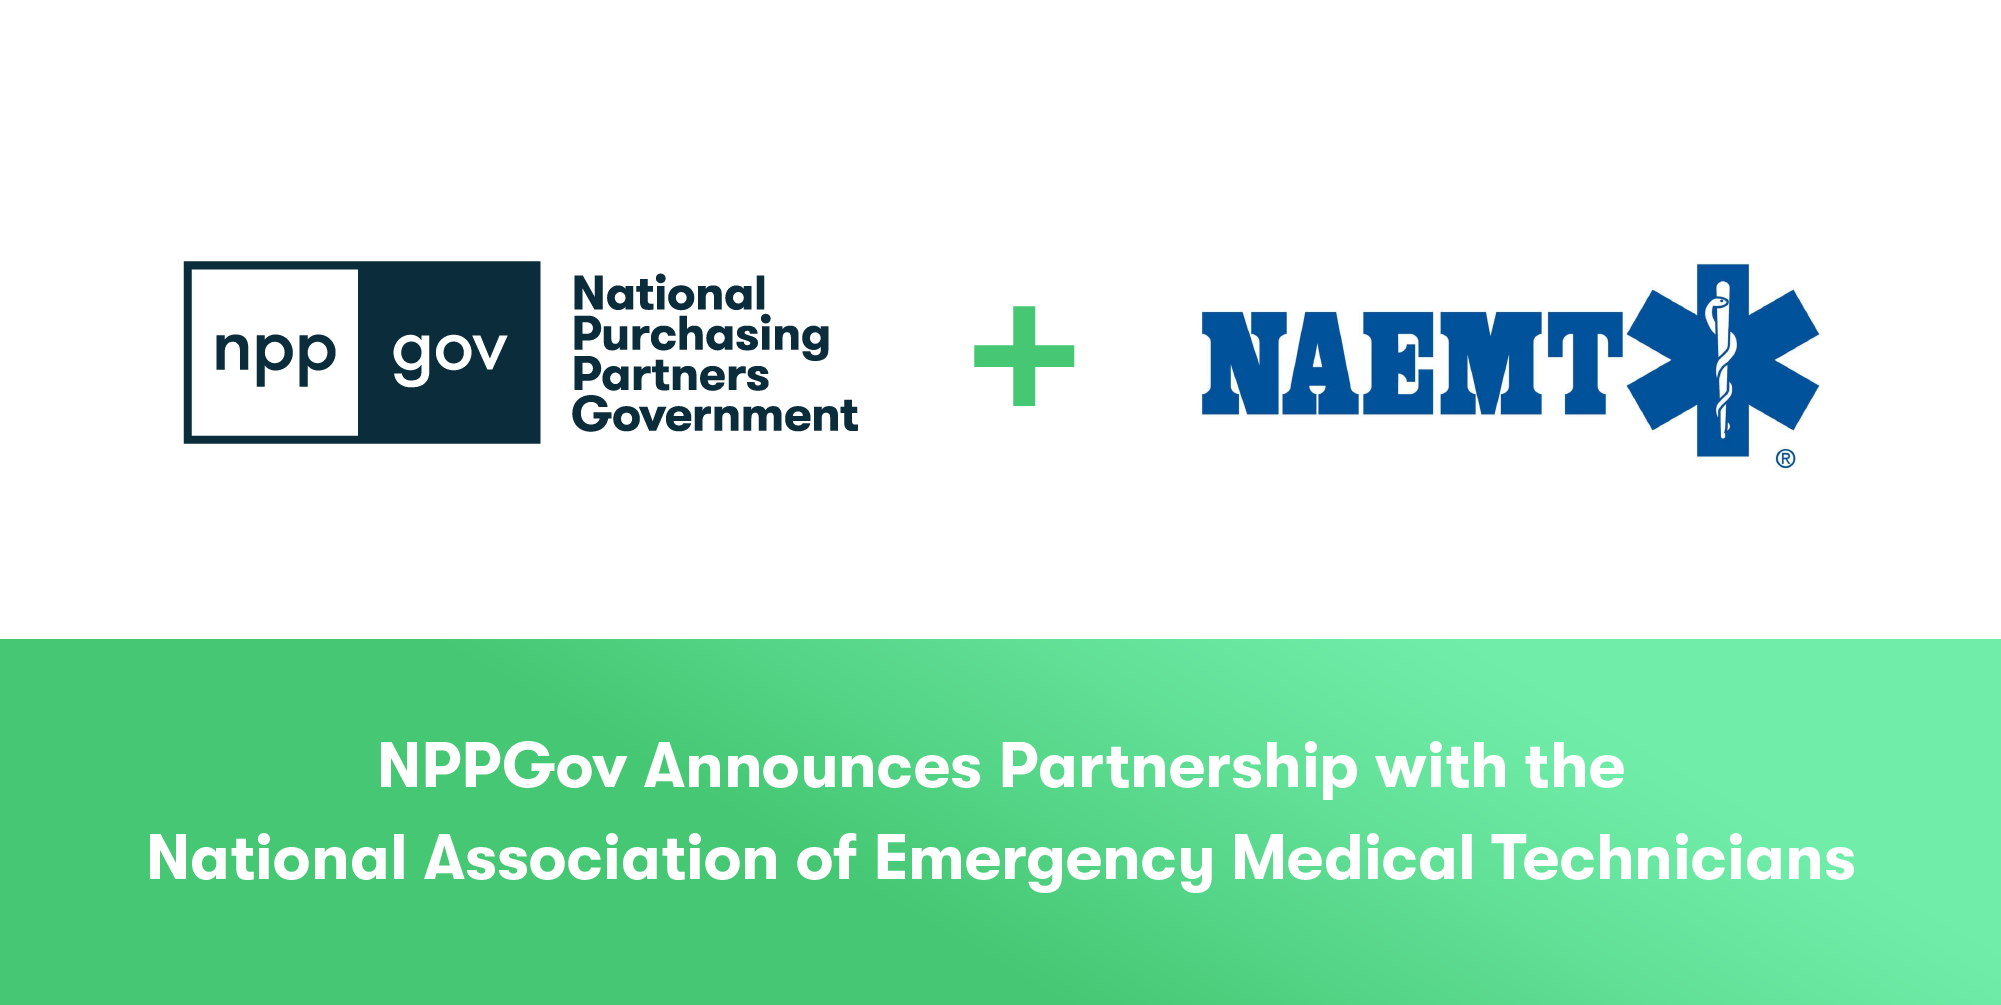 NPPGov Public Safety GPO Partners with NAEMT To Provide Members with Competitive Product and Service Agreements and Supplier Discounts